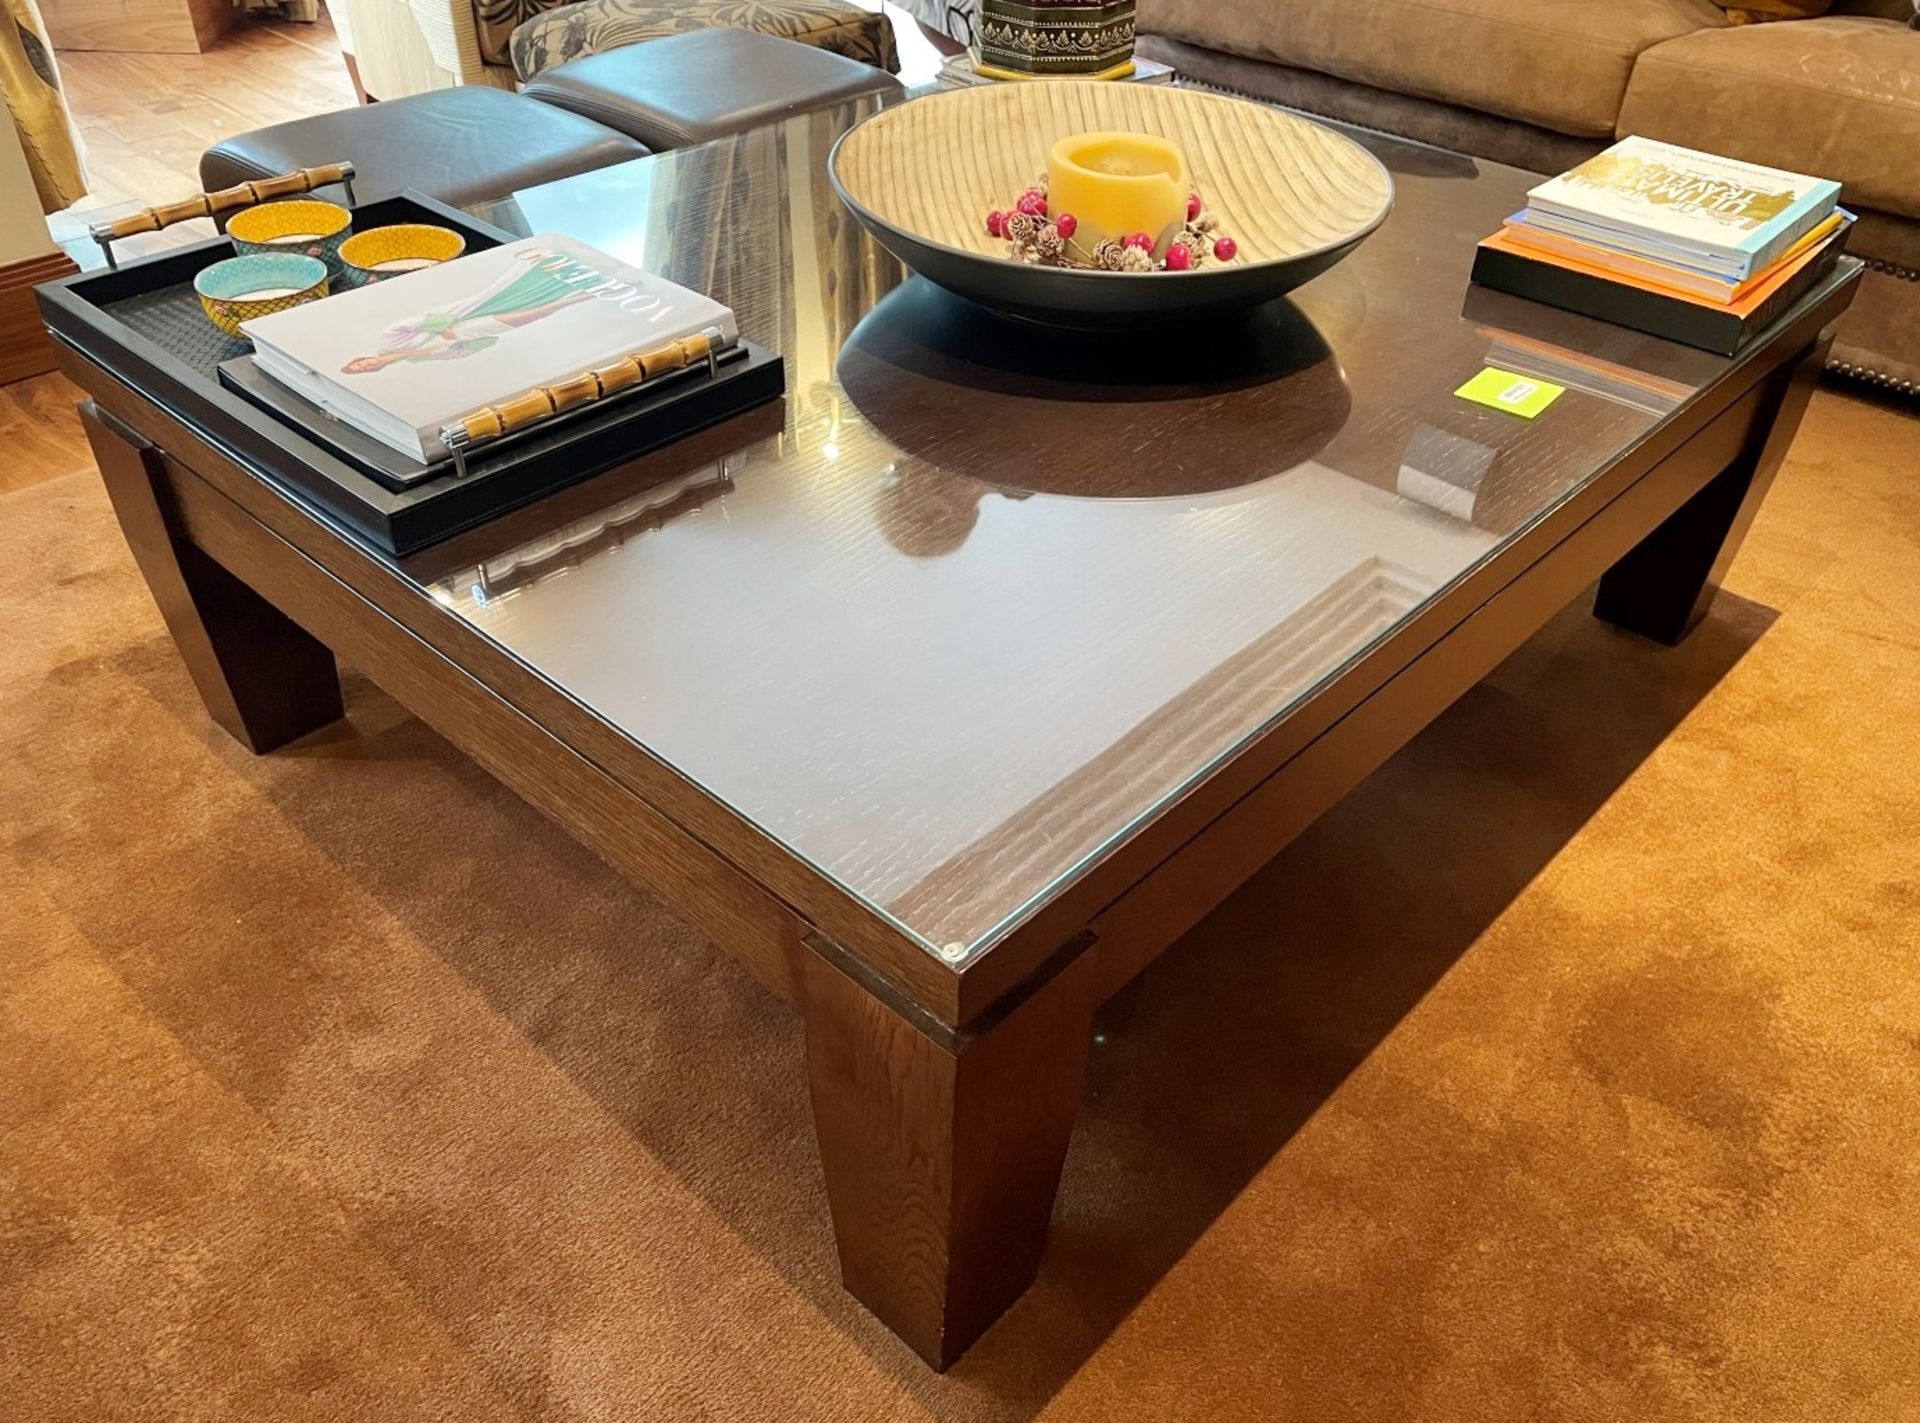 1 x Large Glass Topped Coffee Table With a Solid Wood Table - Dimensions: 150 x 120 x 48cm